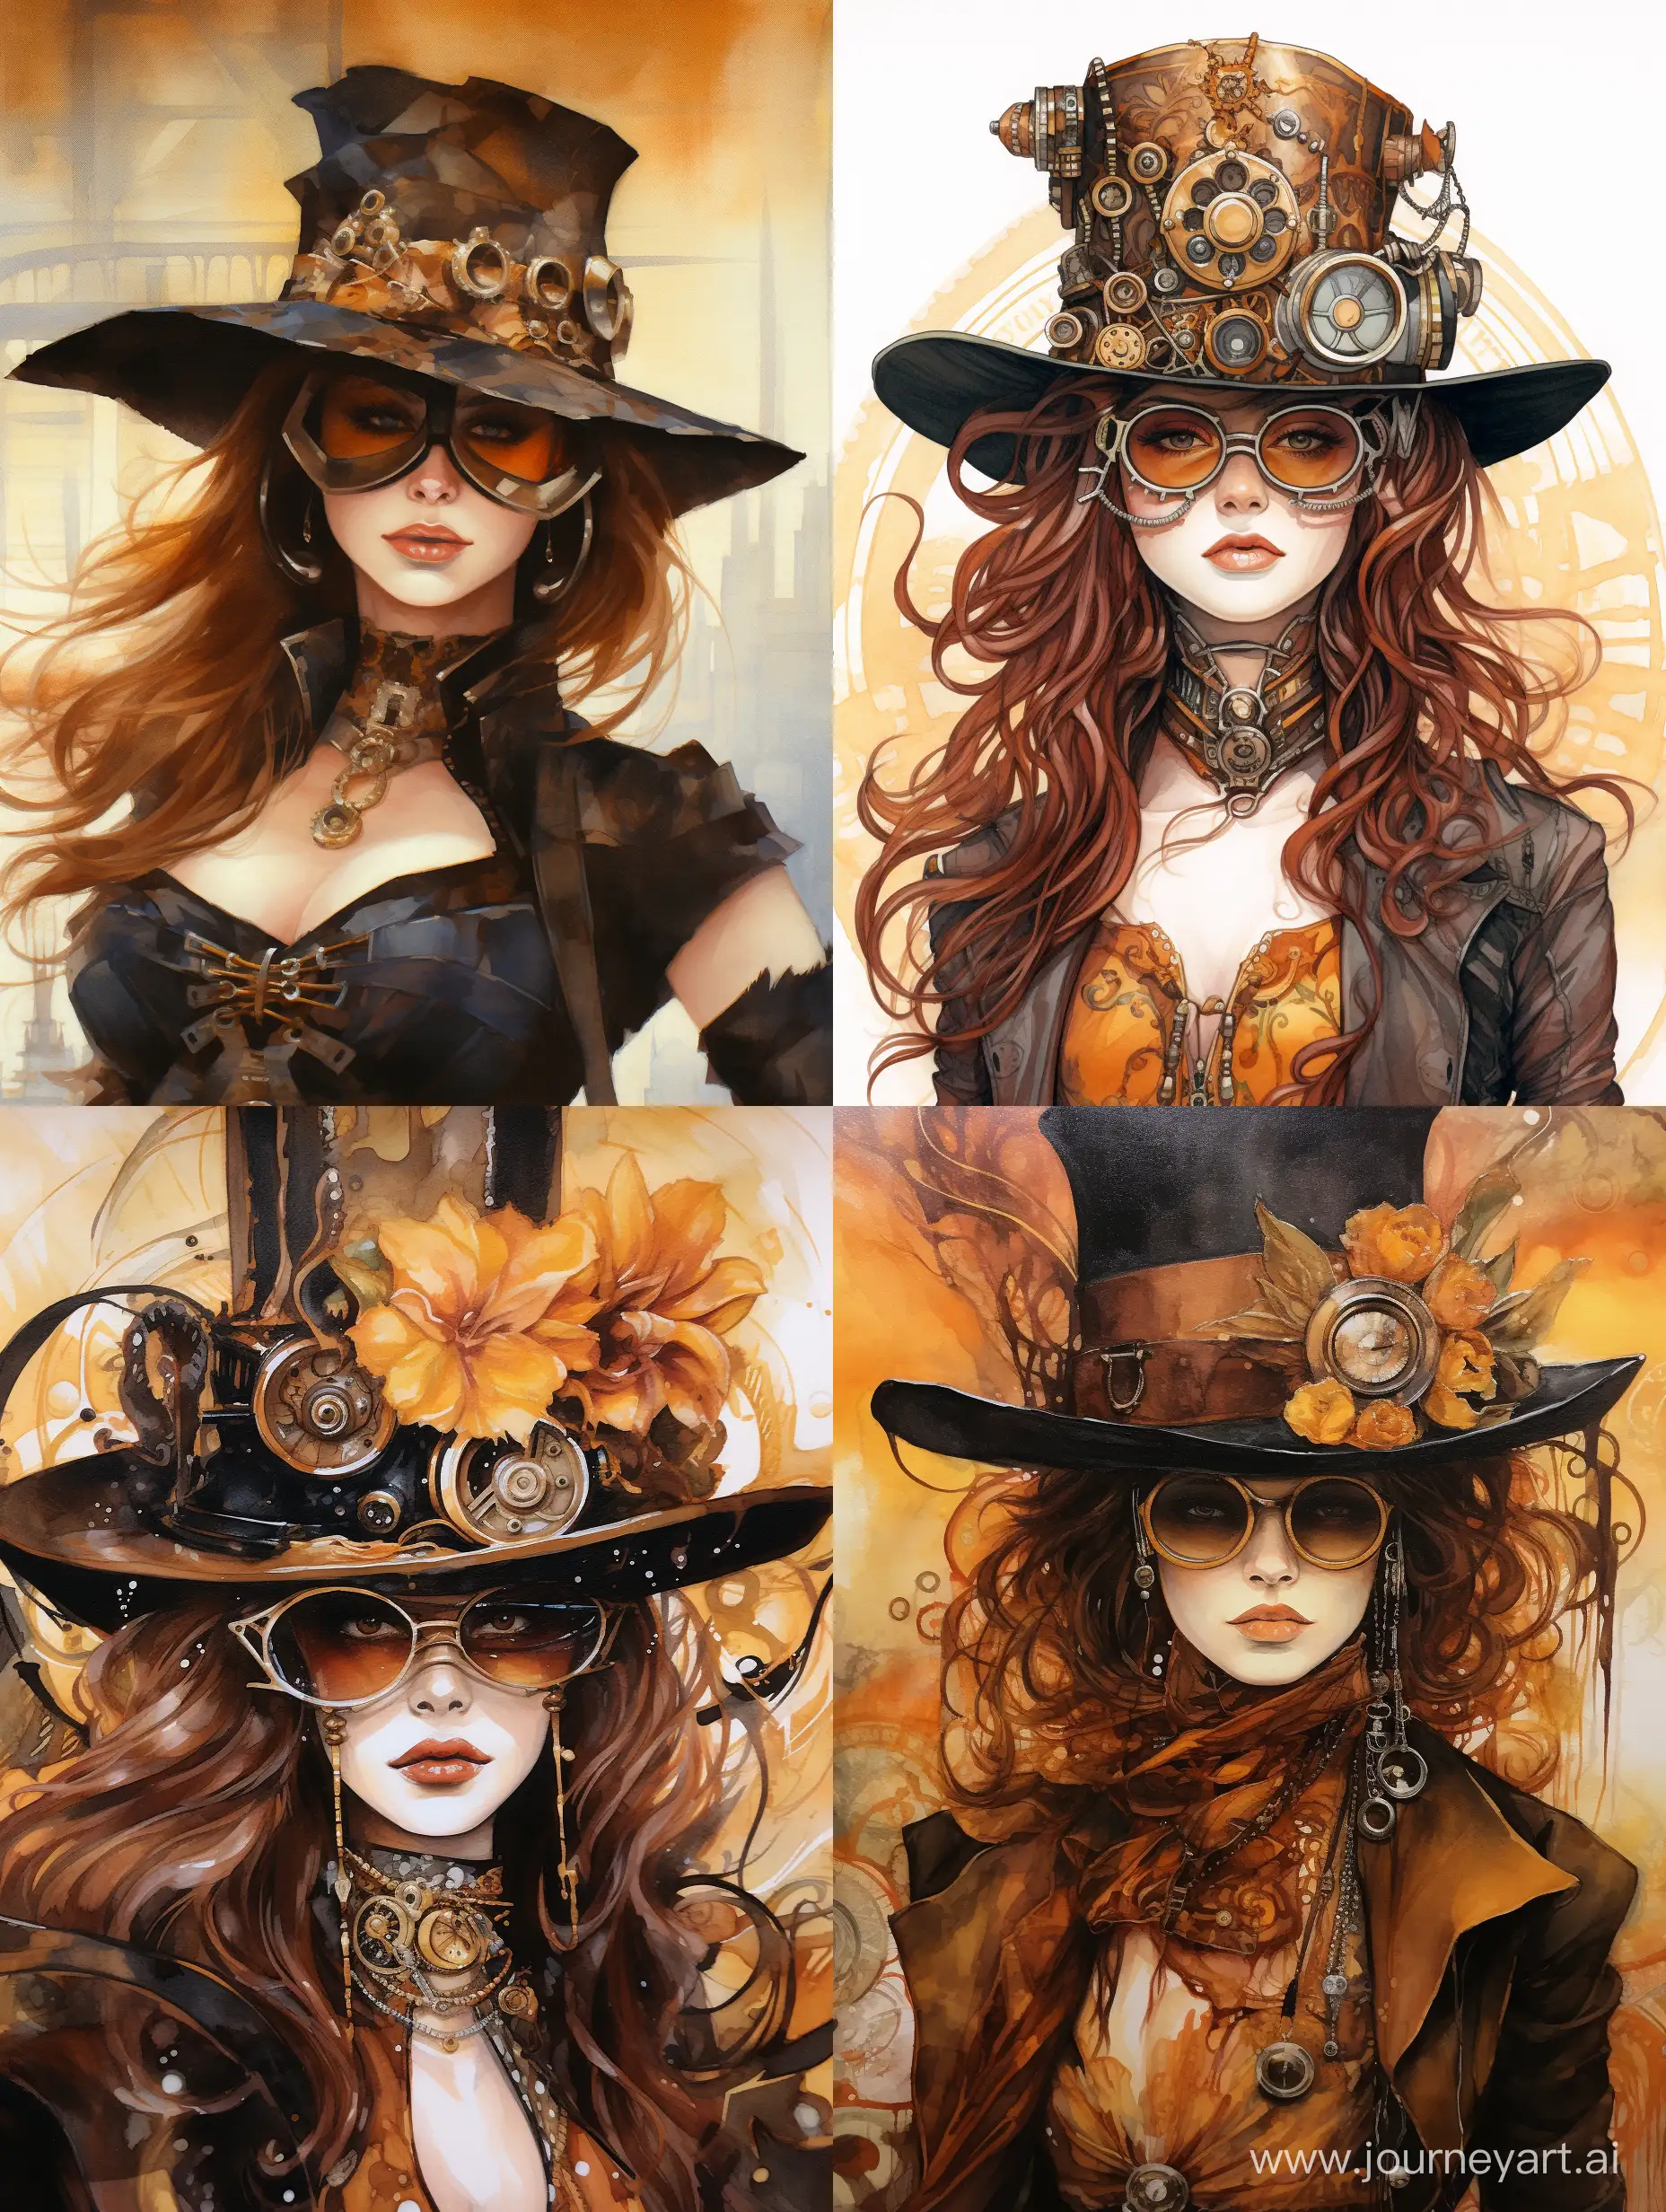 a steampunk woman with piercing eyes. She wears a wide-brimmed hat with jewelry and steampunk glasses. Her posture and gaze convey confidence. The outfit and accessories feature gold and brown tones, complemented by mechanical and floral elements that create rich texture and detail. Still from the film. Oil painting, paint smudges, alcohol ink, splash